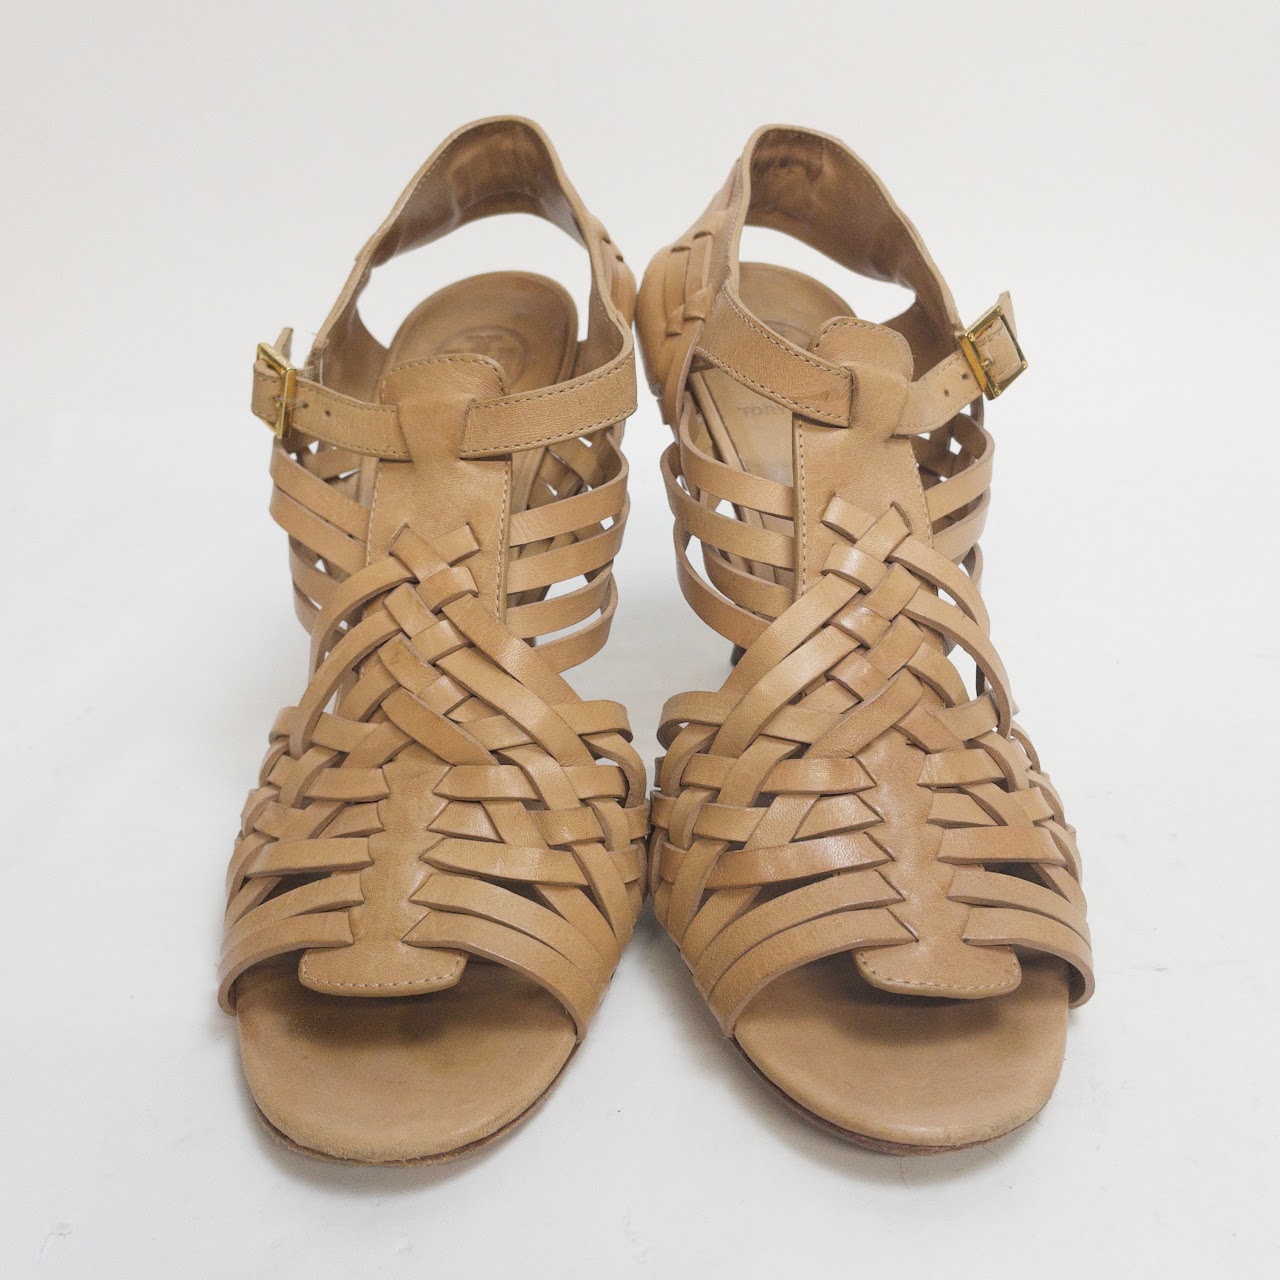 Tory Burch Strappy Fisherman Sandals